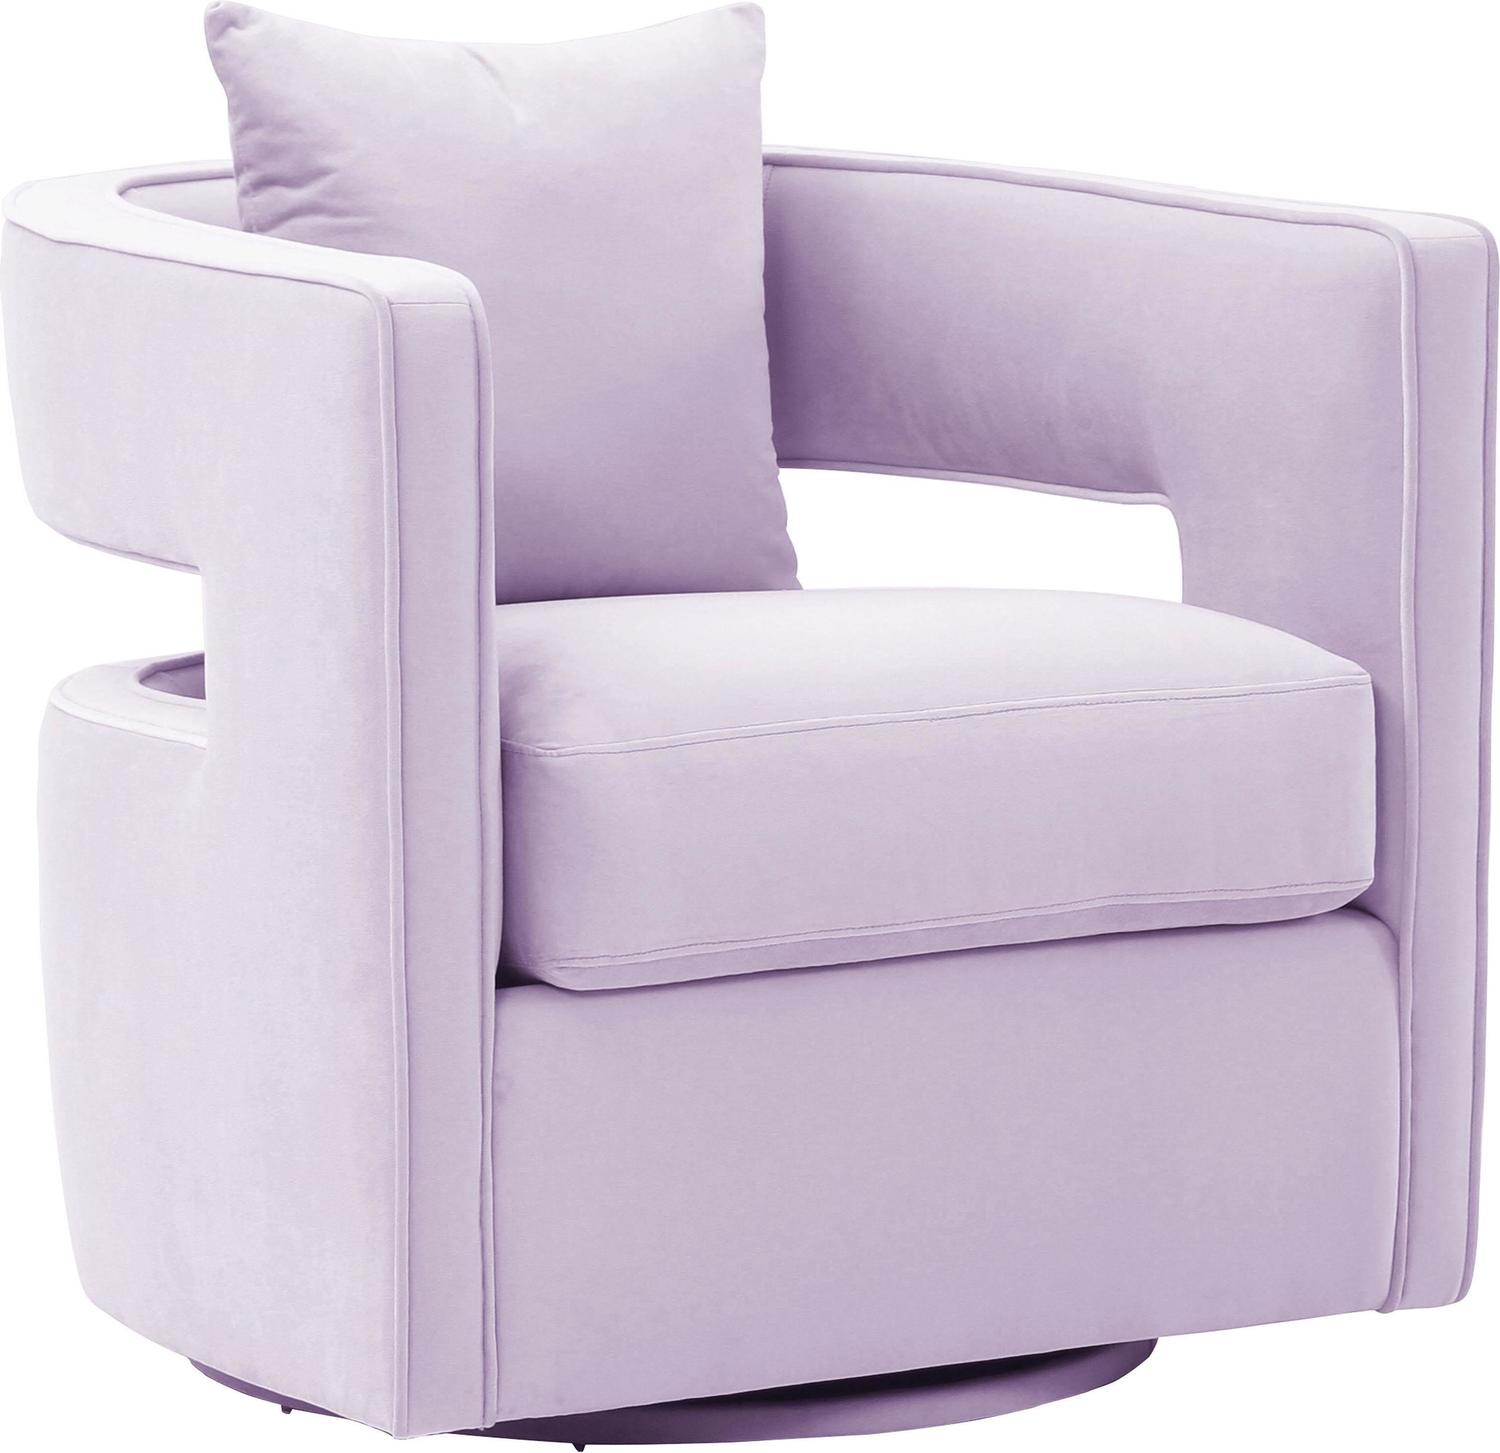 chair and table set for living room Contemporary Design Furniture Accent Chairs Lavender